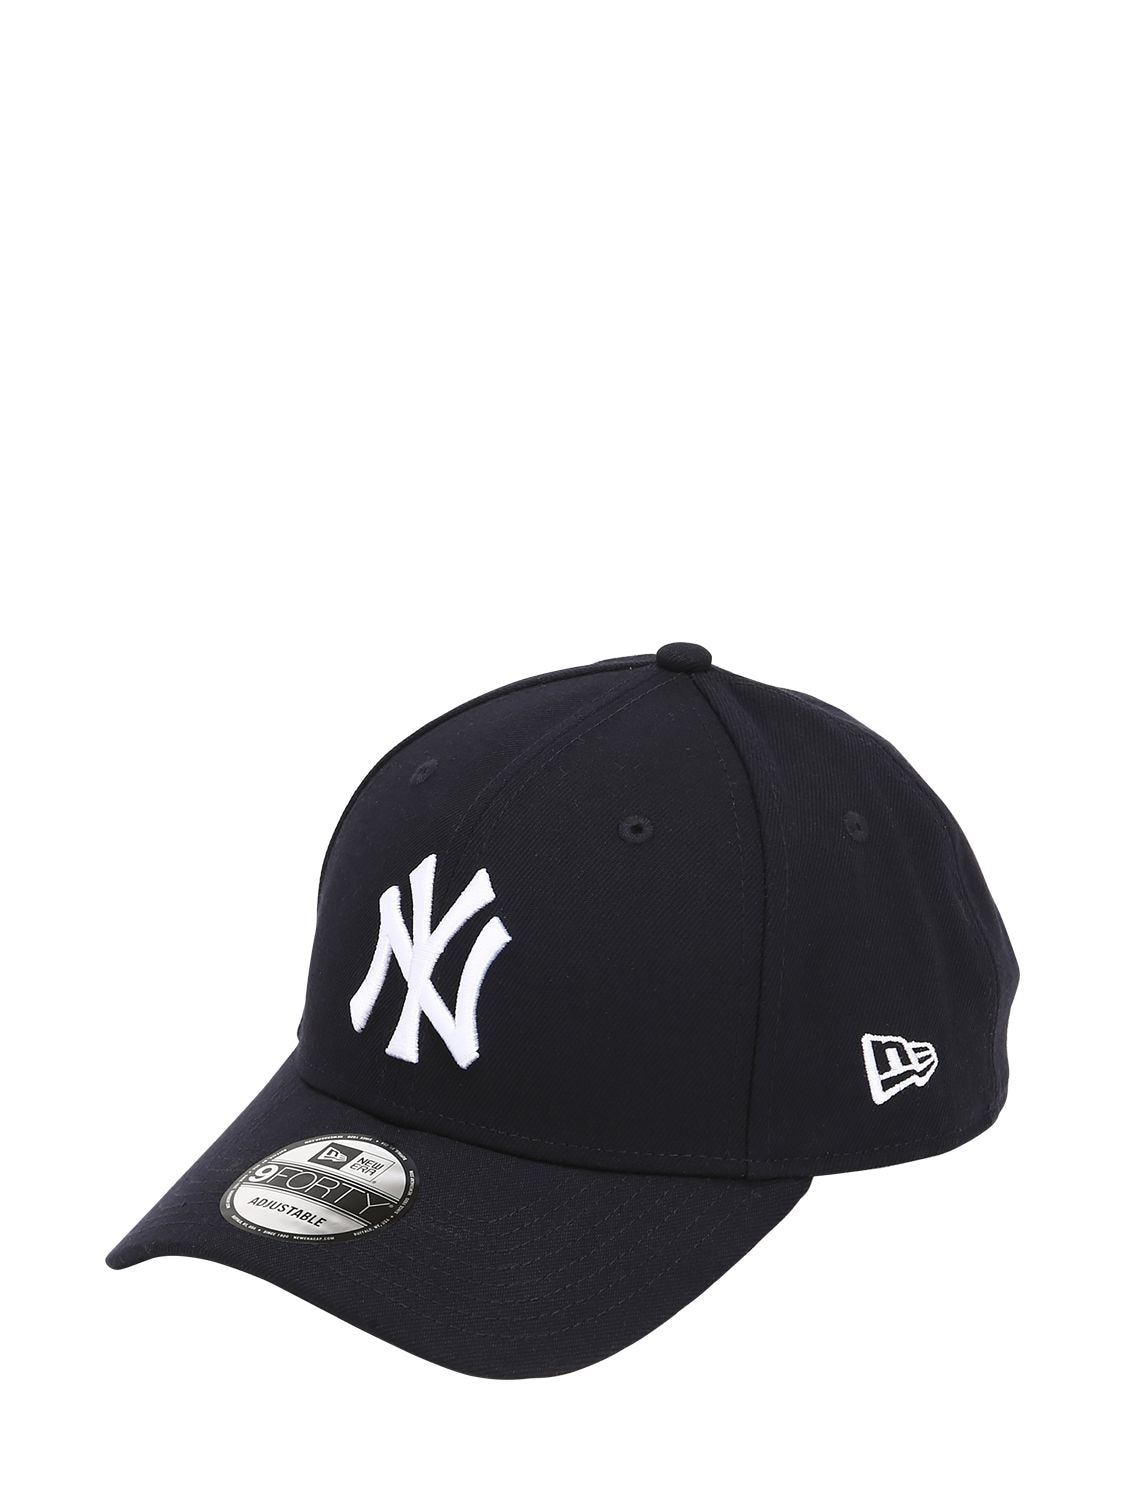 New Era 9forty Mlb New York Yankees Official Hat In Black